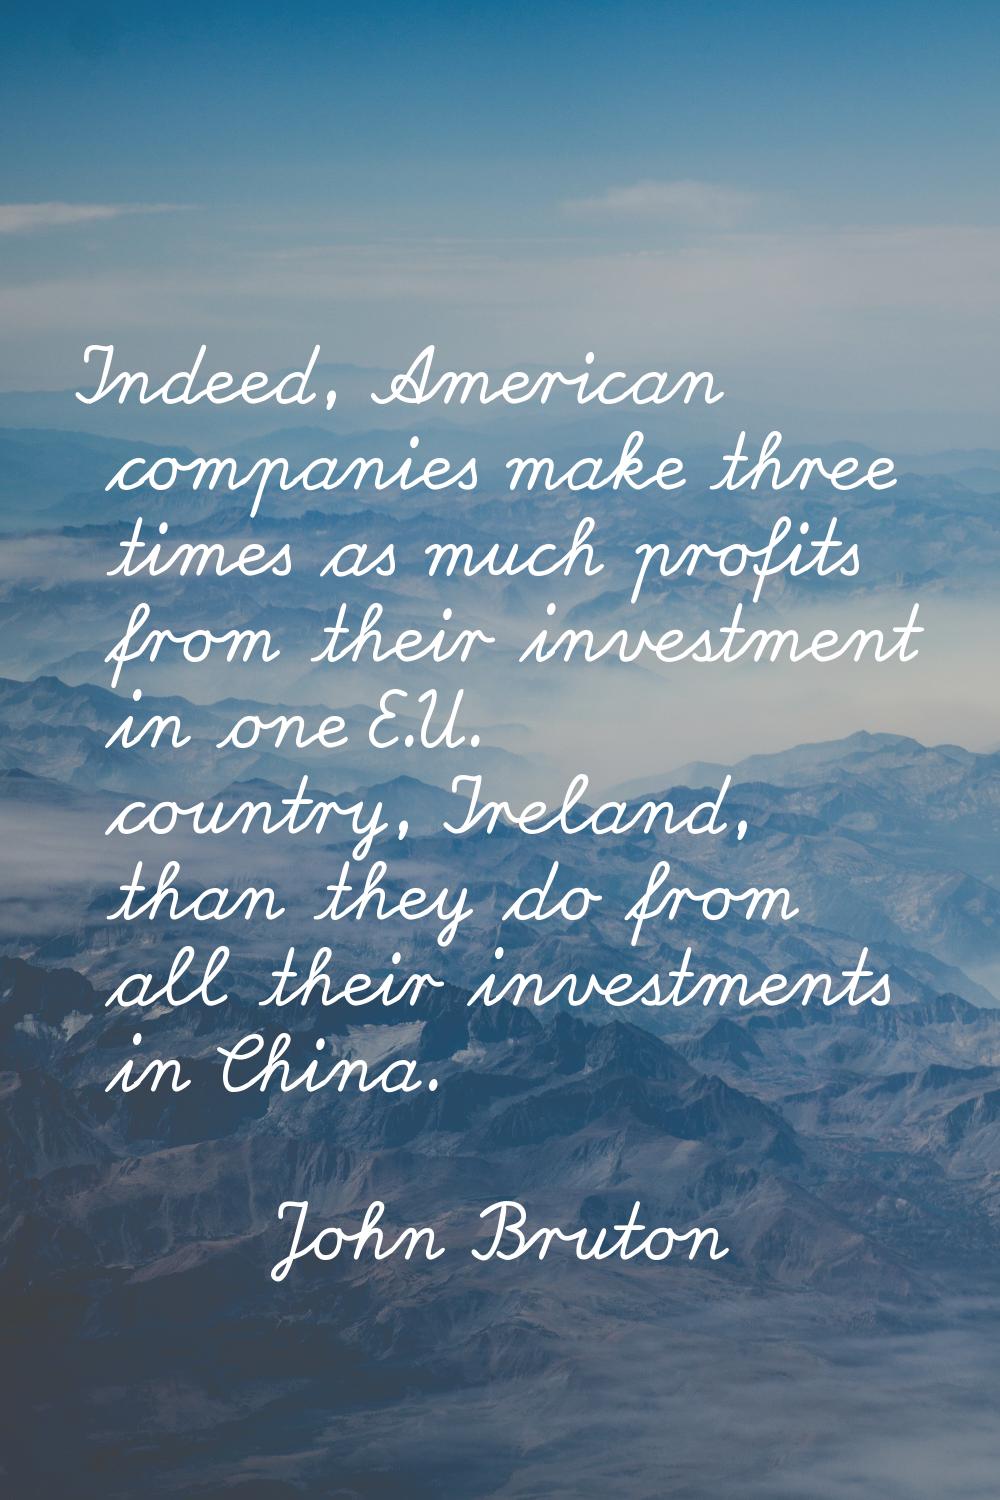 Indeed, American companies make three times as much profits from their investment in one E.U. count